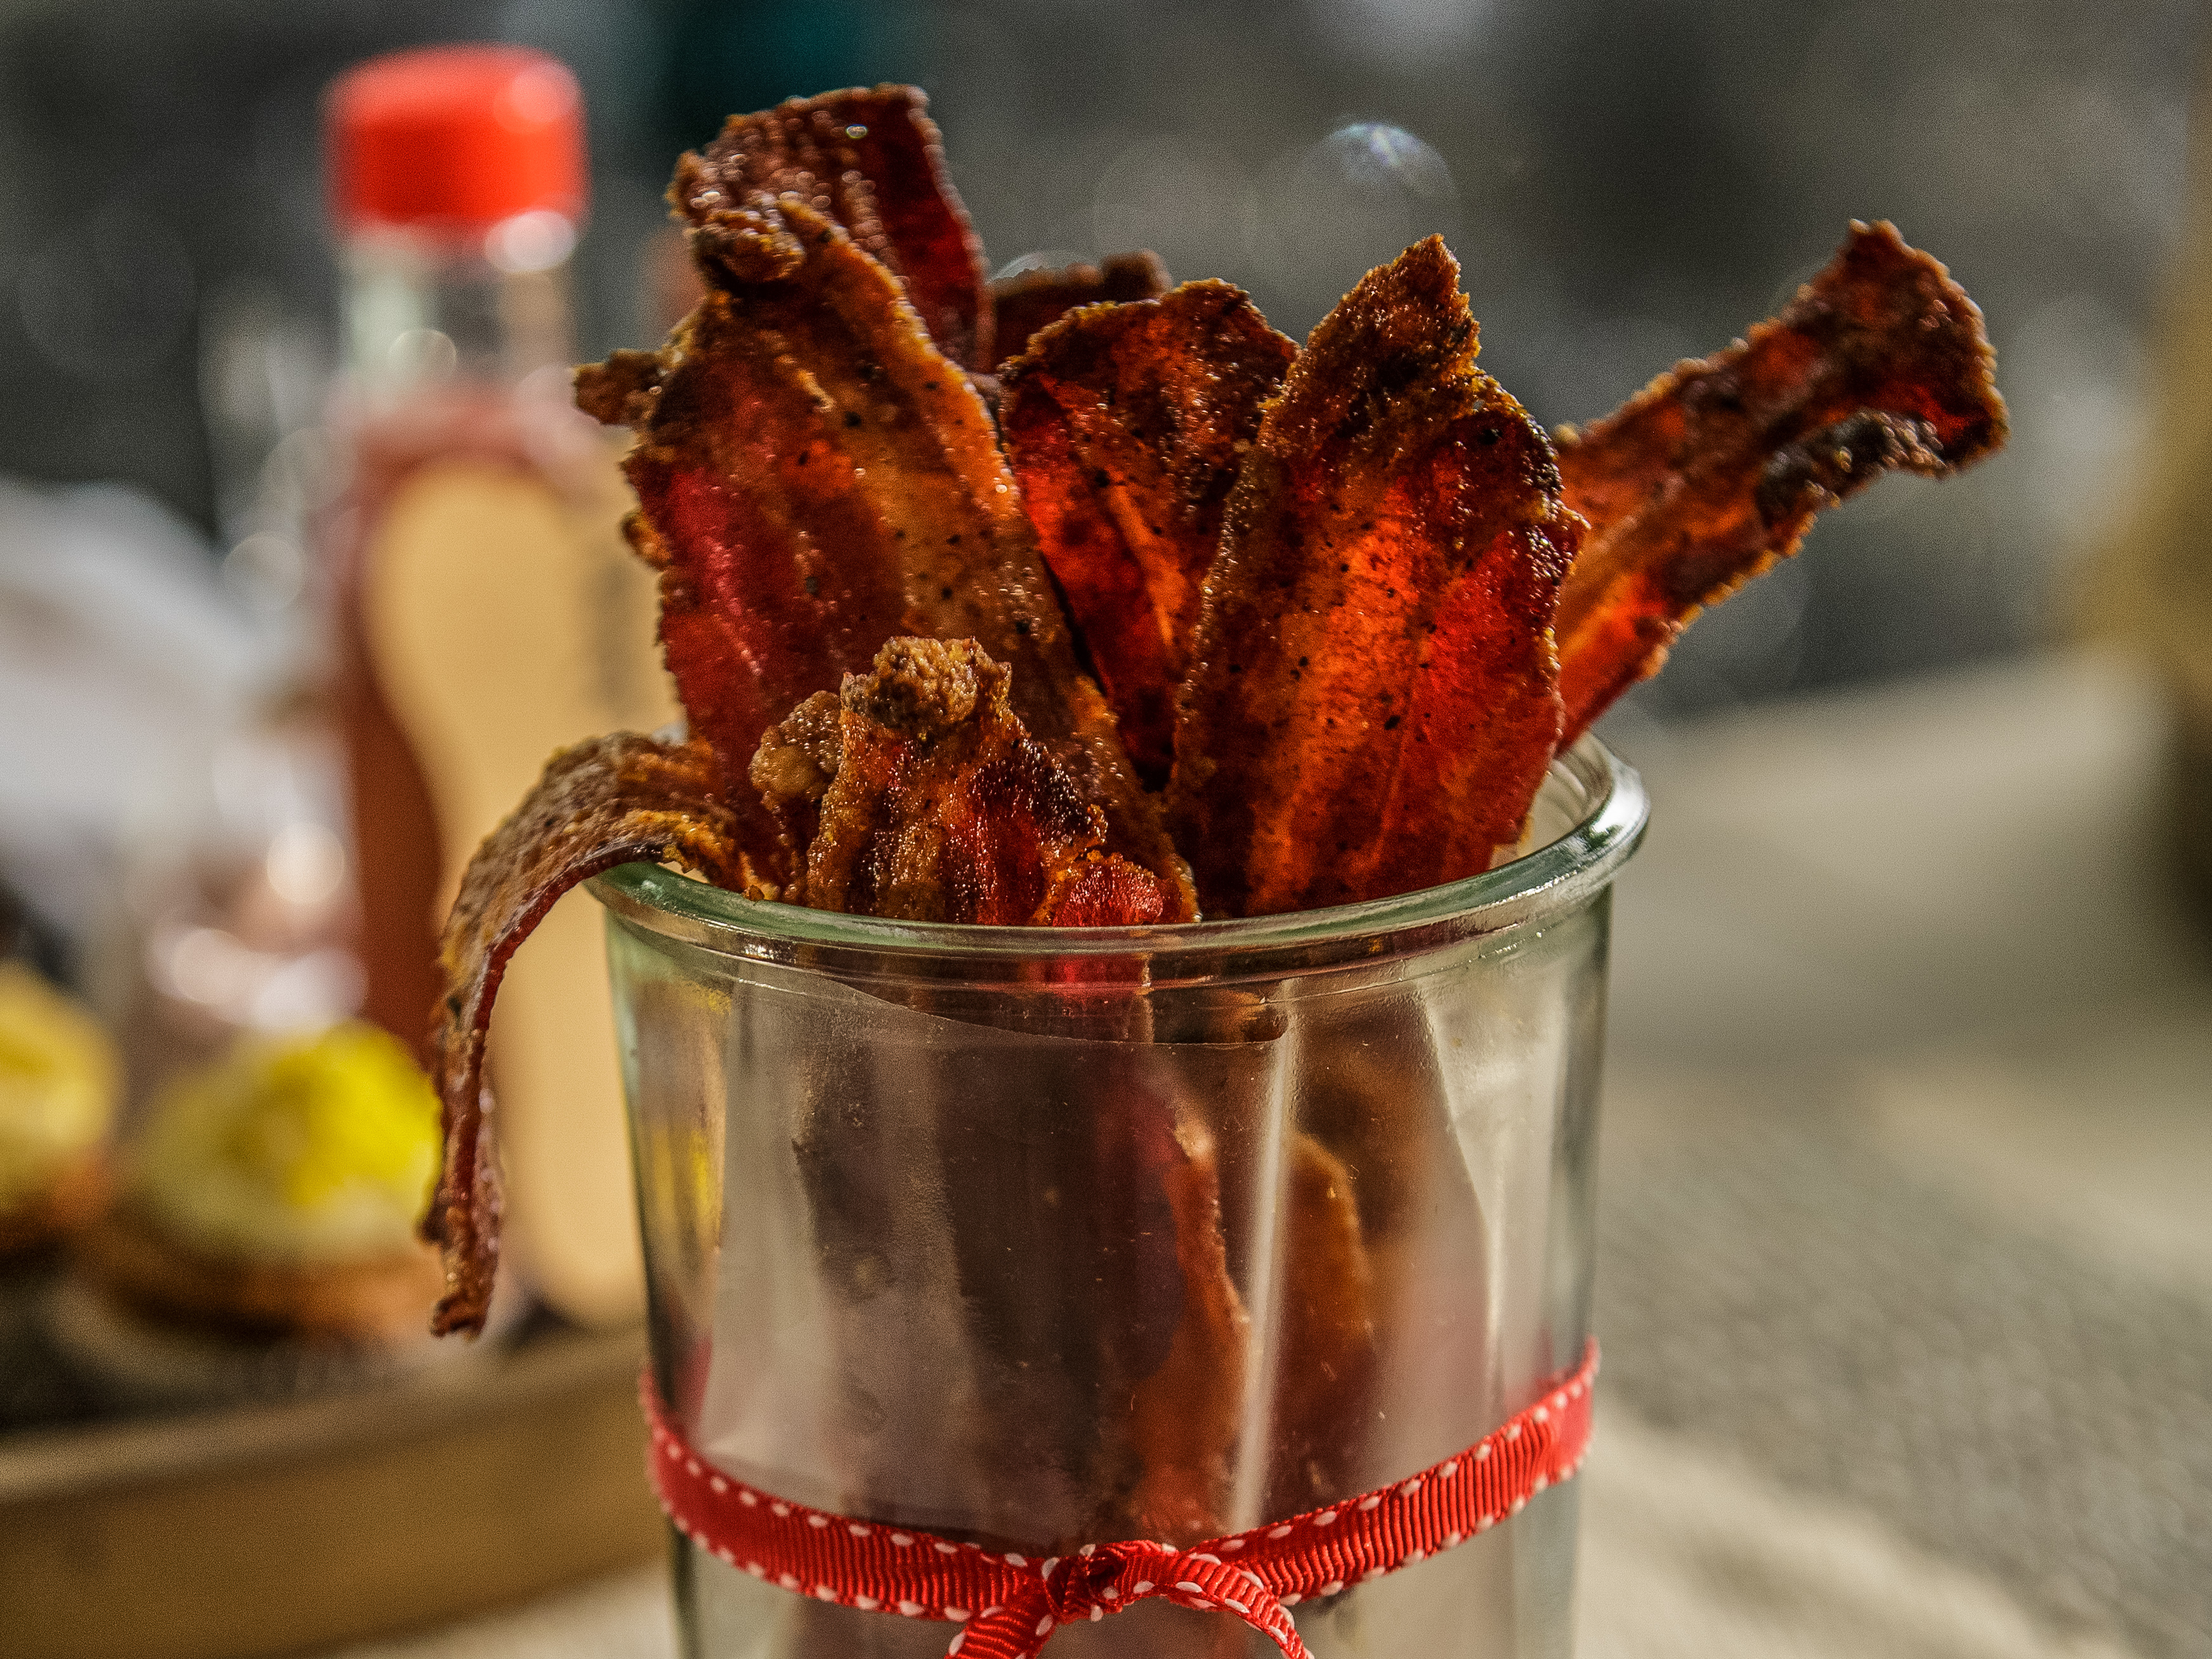 Trisha Yearwood's Southern recipes are packed with top-notch bacon